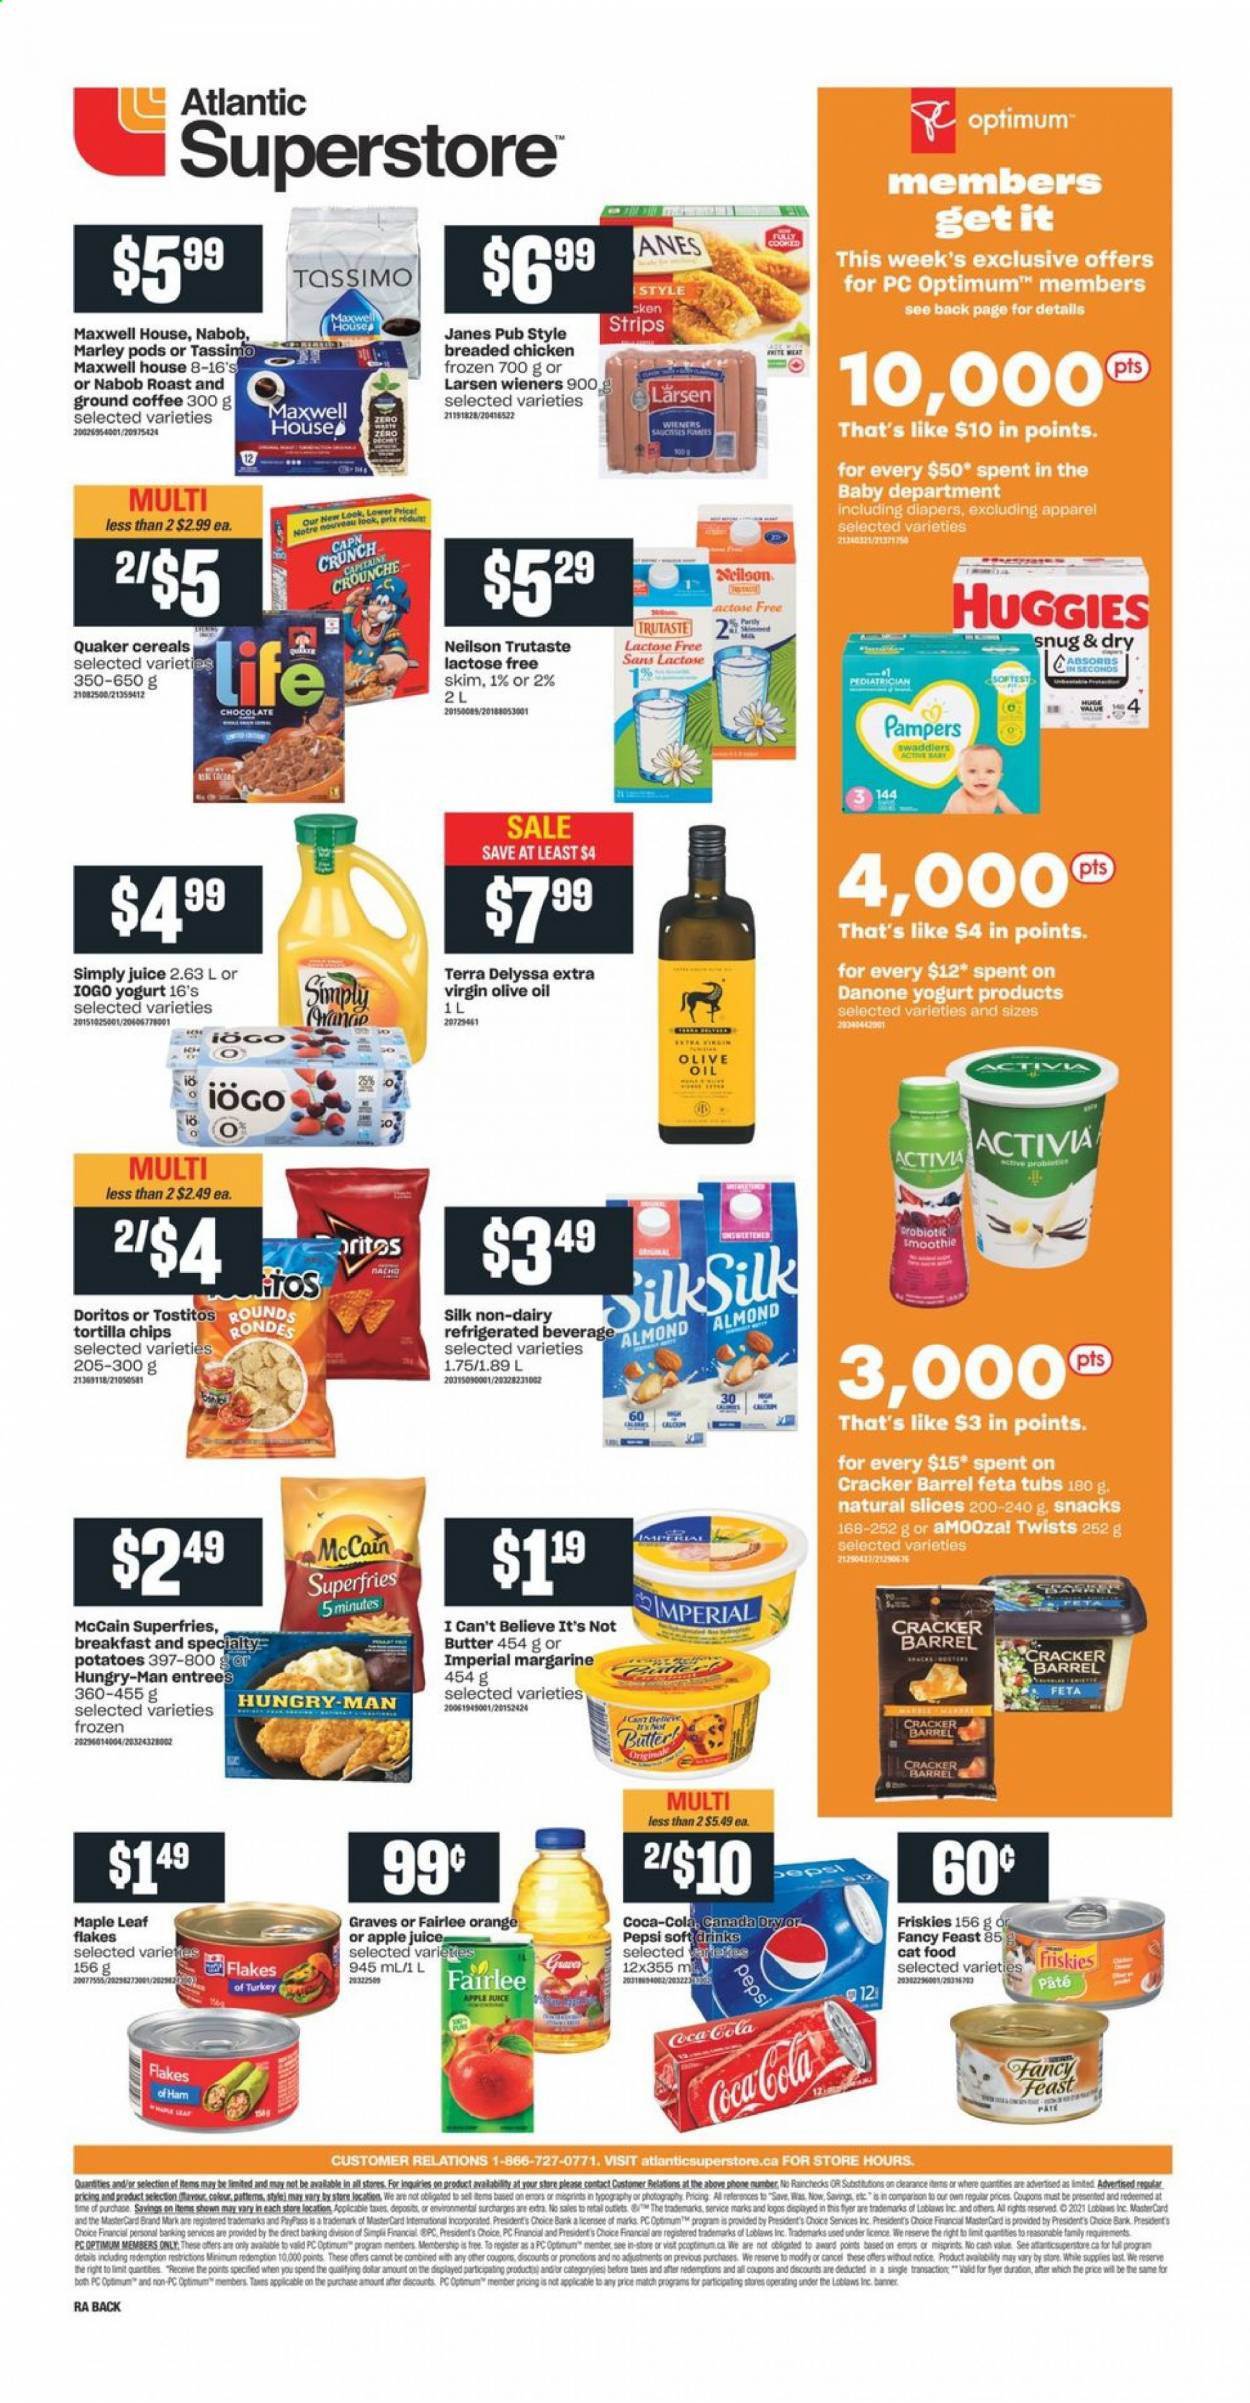 thumbnail - Atlantic Superstore Flyer - April 22, 2021 - April 28, 2021 - Sales products - potatoes, fried chicken, Quaker, ham, Président, feta, yoghurt, Silk, butter, margarine, I Can't Believe It's Not Butter, strips, McCain, potato fries, chocolate, snack, crackers, Doritos, tortilla chips, Tostitos, cereals, extra virgin olive oil, olive oil, oil, apple juice, Canada Dry, Coca-Cola, Pepsi, juice, smoothie, Maxwell House, coffee, ground coffee, nappies, animal food, cat food, Optimum, Fancy Feast, Friskies, Danone, Huggies, Pampers. Page 2.